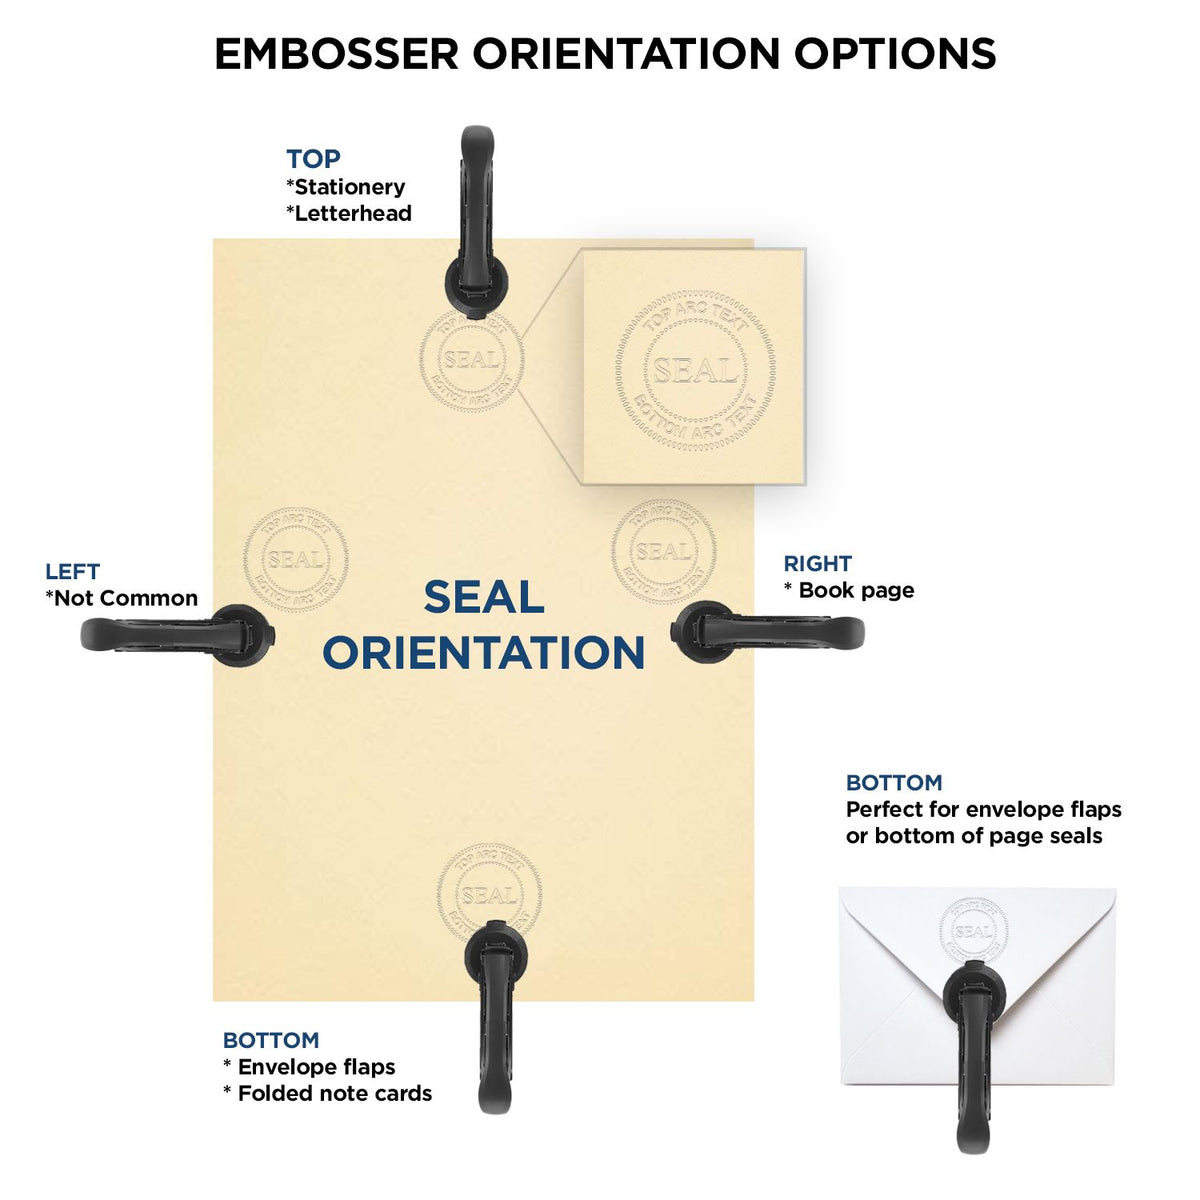 An infographic for the State of Delaware Soft Land Surveyor Embossing Seal showing embosser orientation, this is showing examples of a top, bottom, right and left insert.